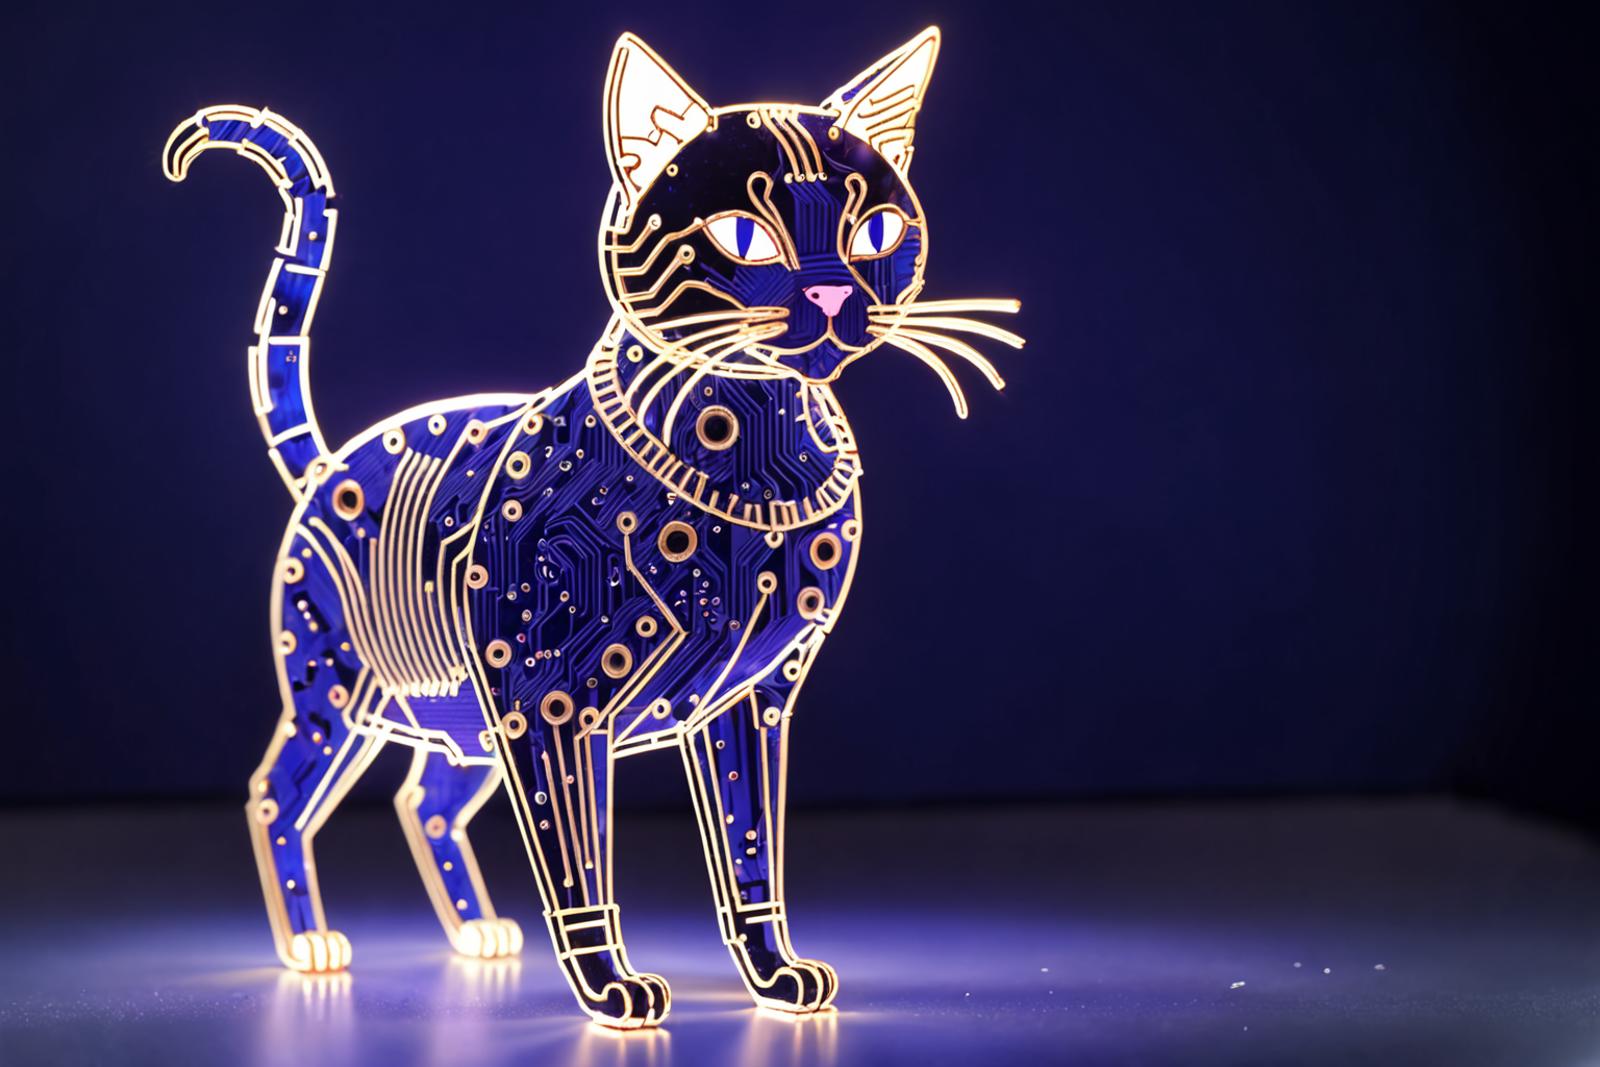 Blue light up cat with a yellow face standing on a blue background.